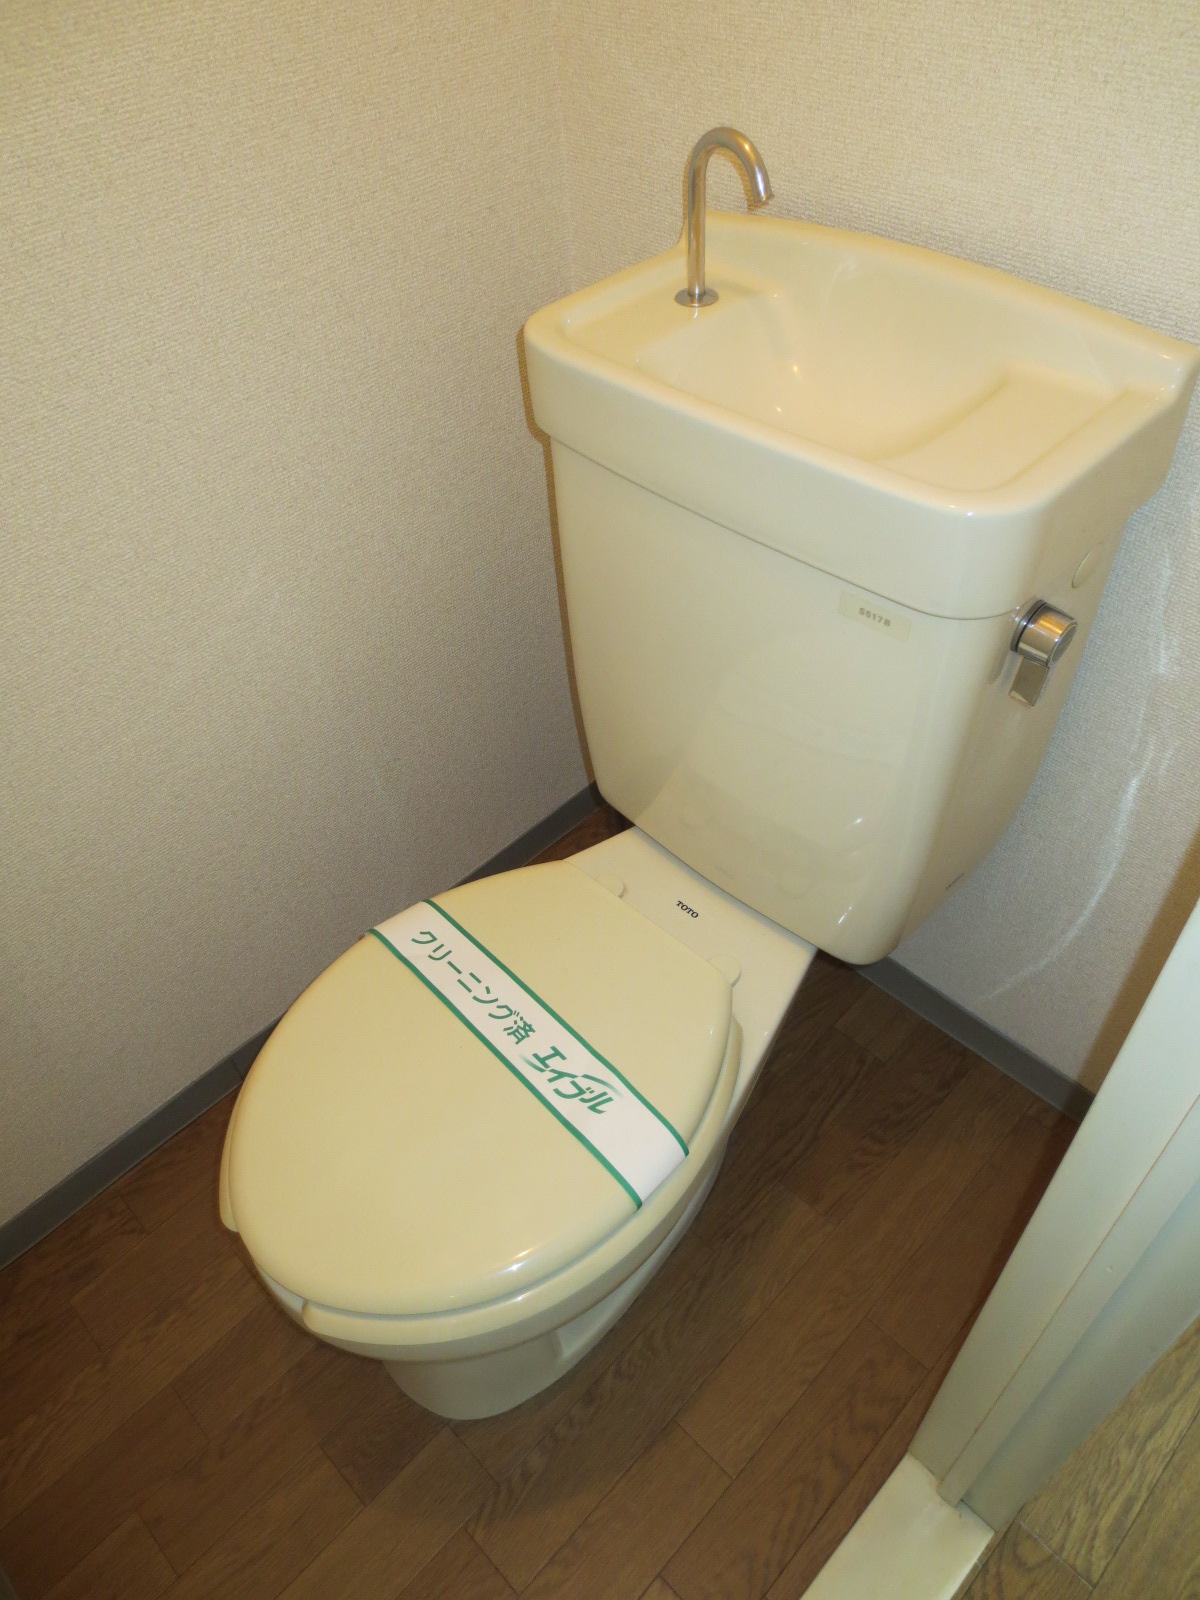 Toilet. Room with cleanliness